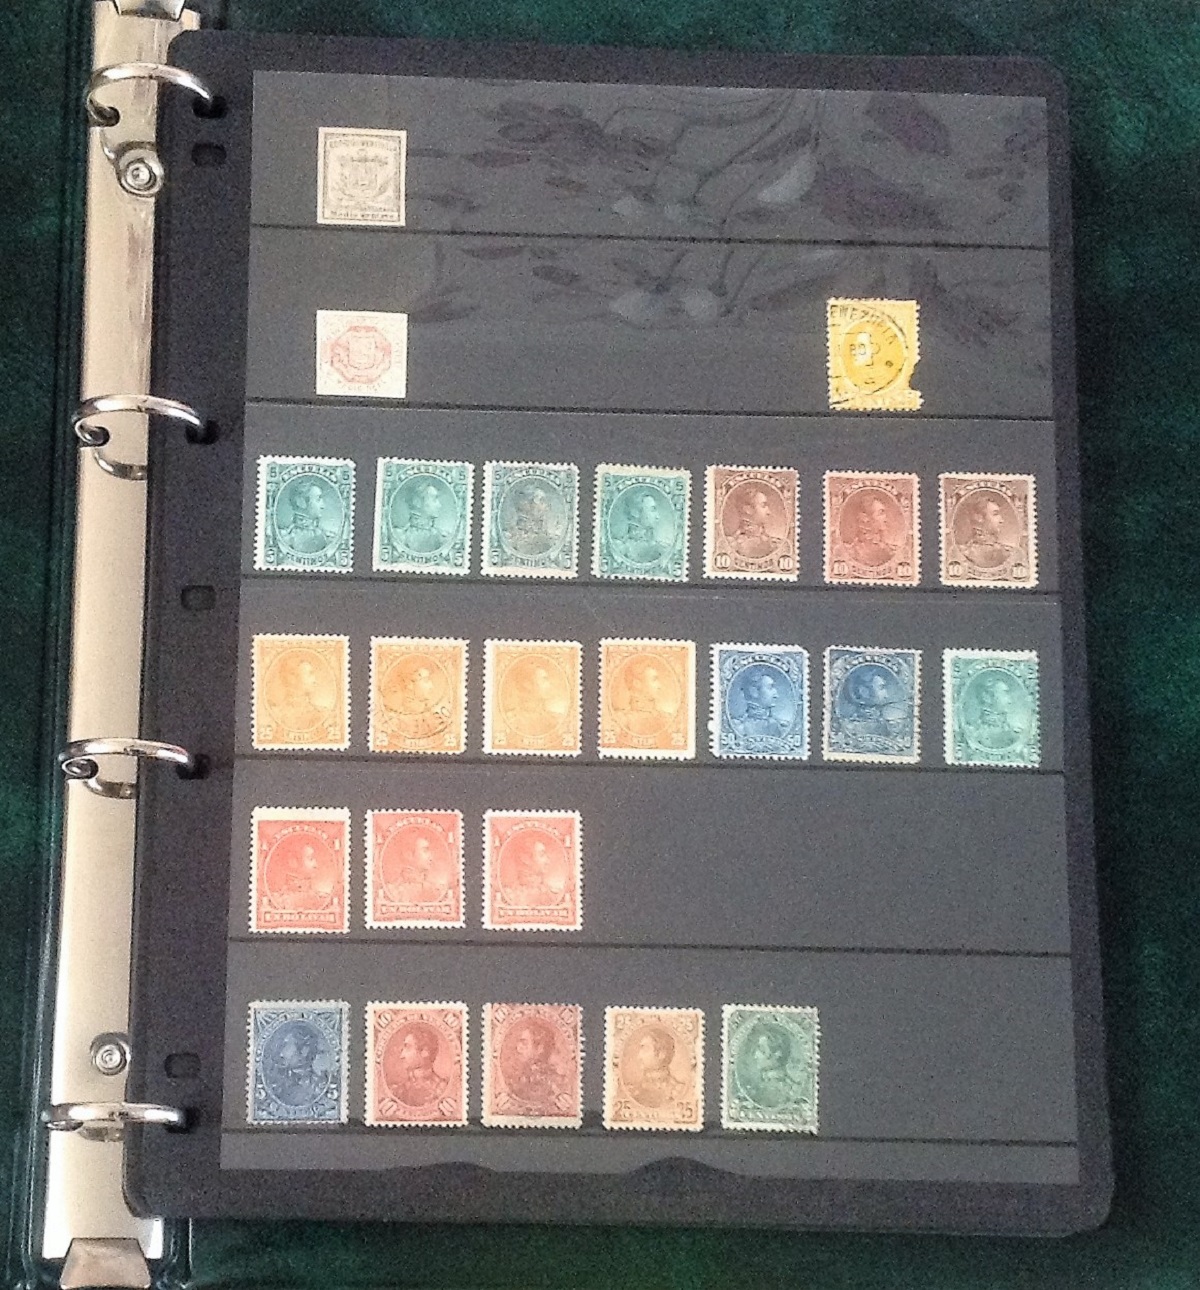 Venezuela stamp collection 17 album leaves house in album a lot of early material. Good Condition.